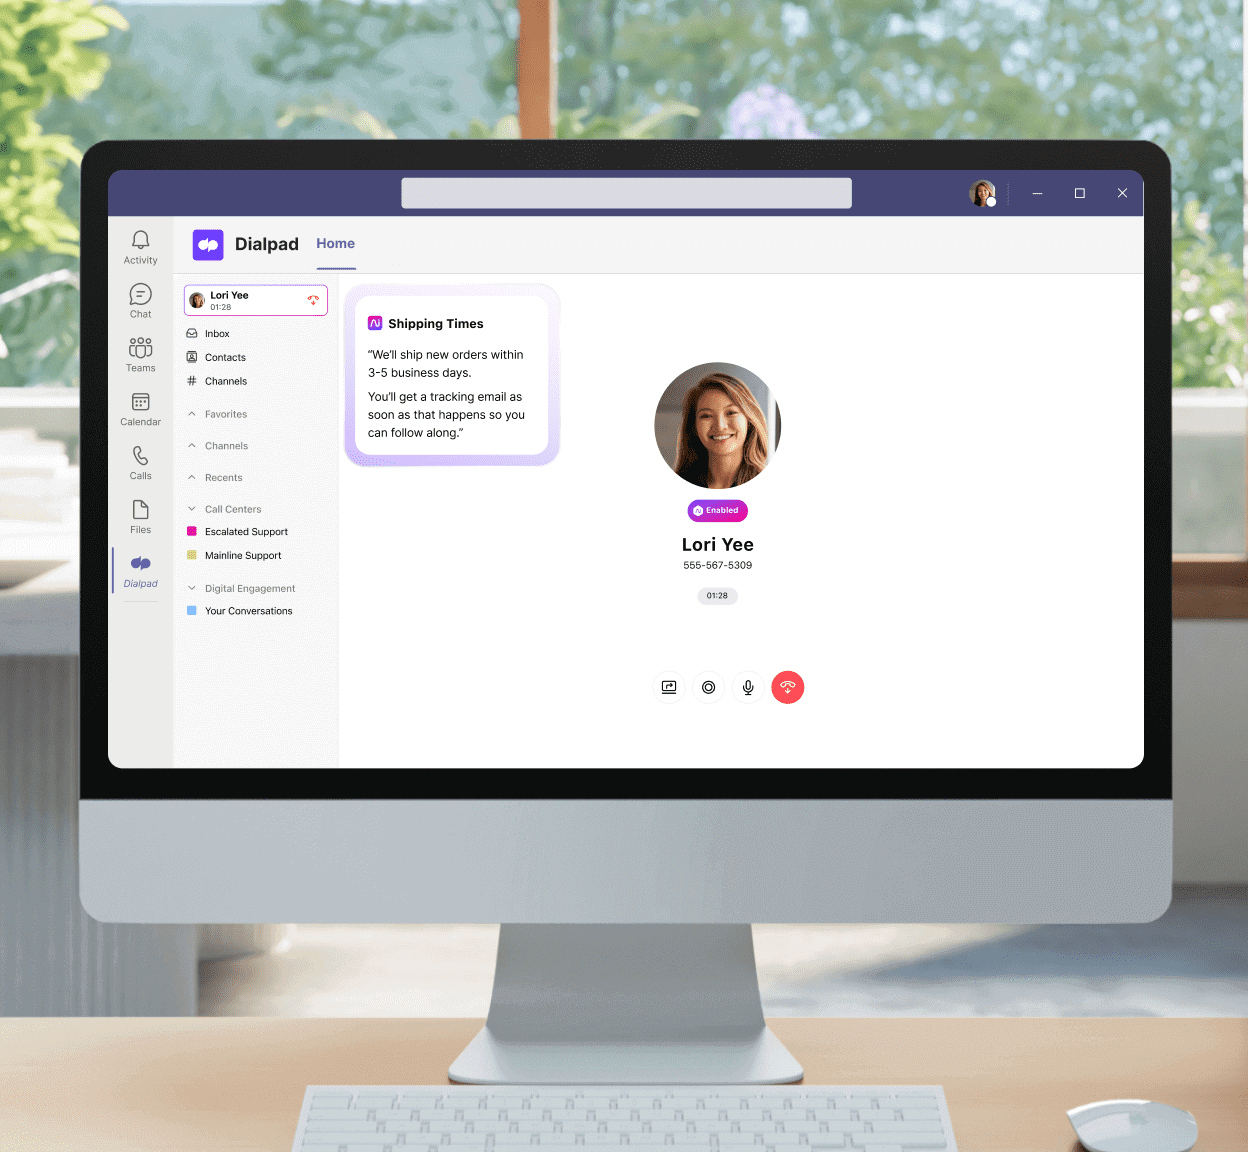 A computer showing the UI of the Dialpad integration on the Microsoft Teams app